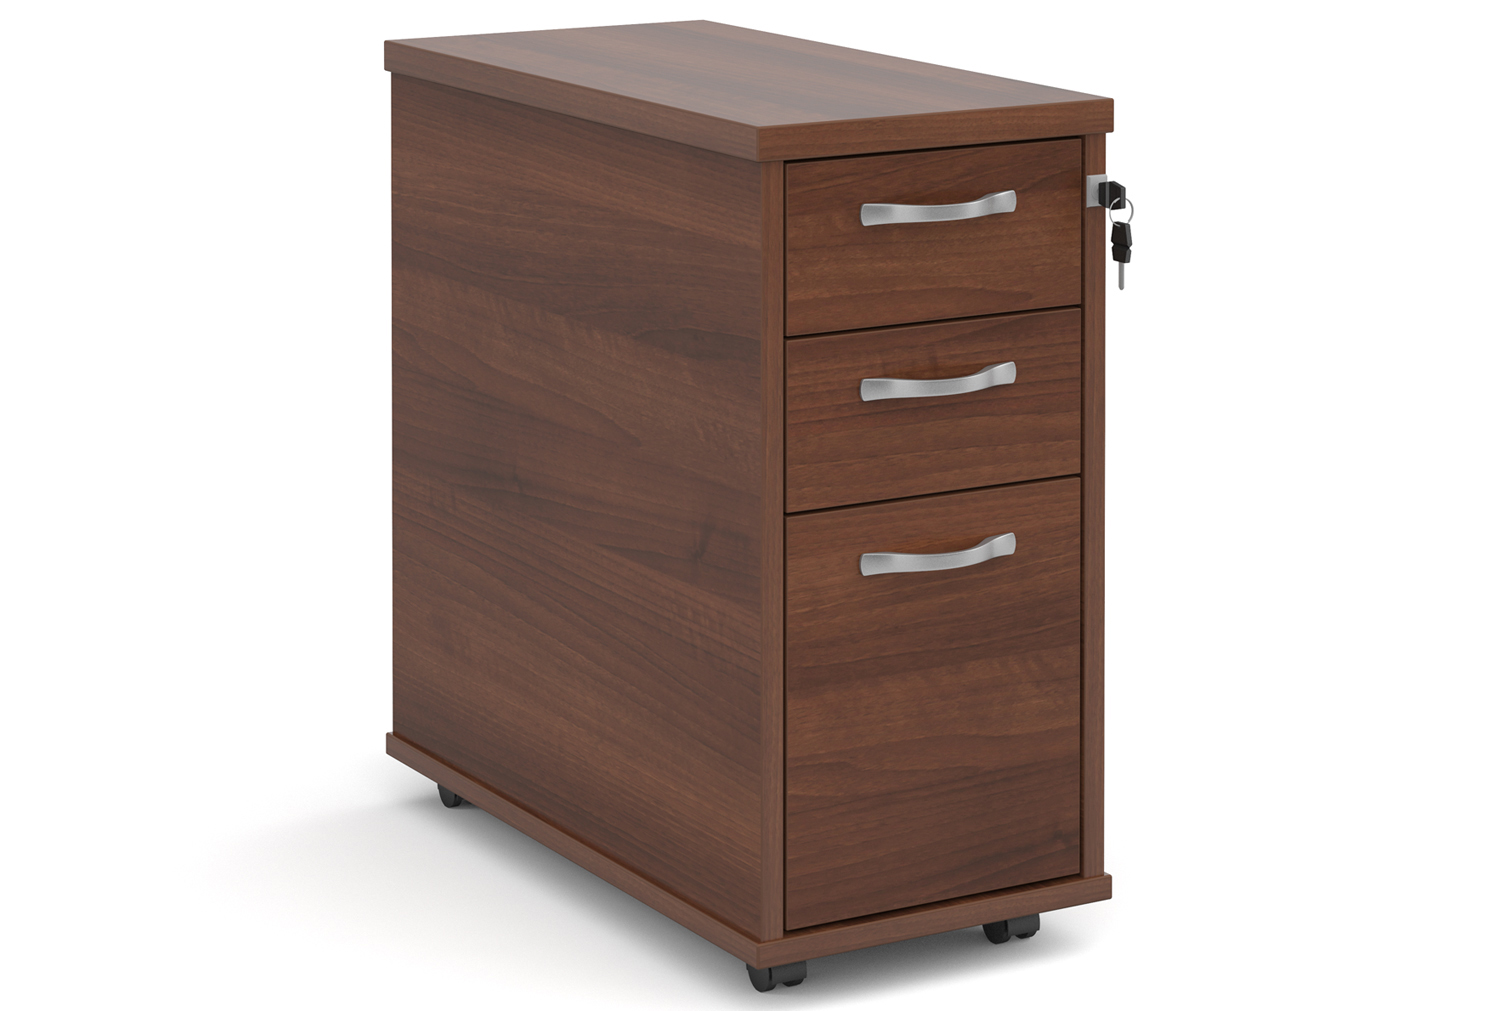 Tully Tall Slimline Mobile Pedestal, Walnut, Express Delivery